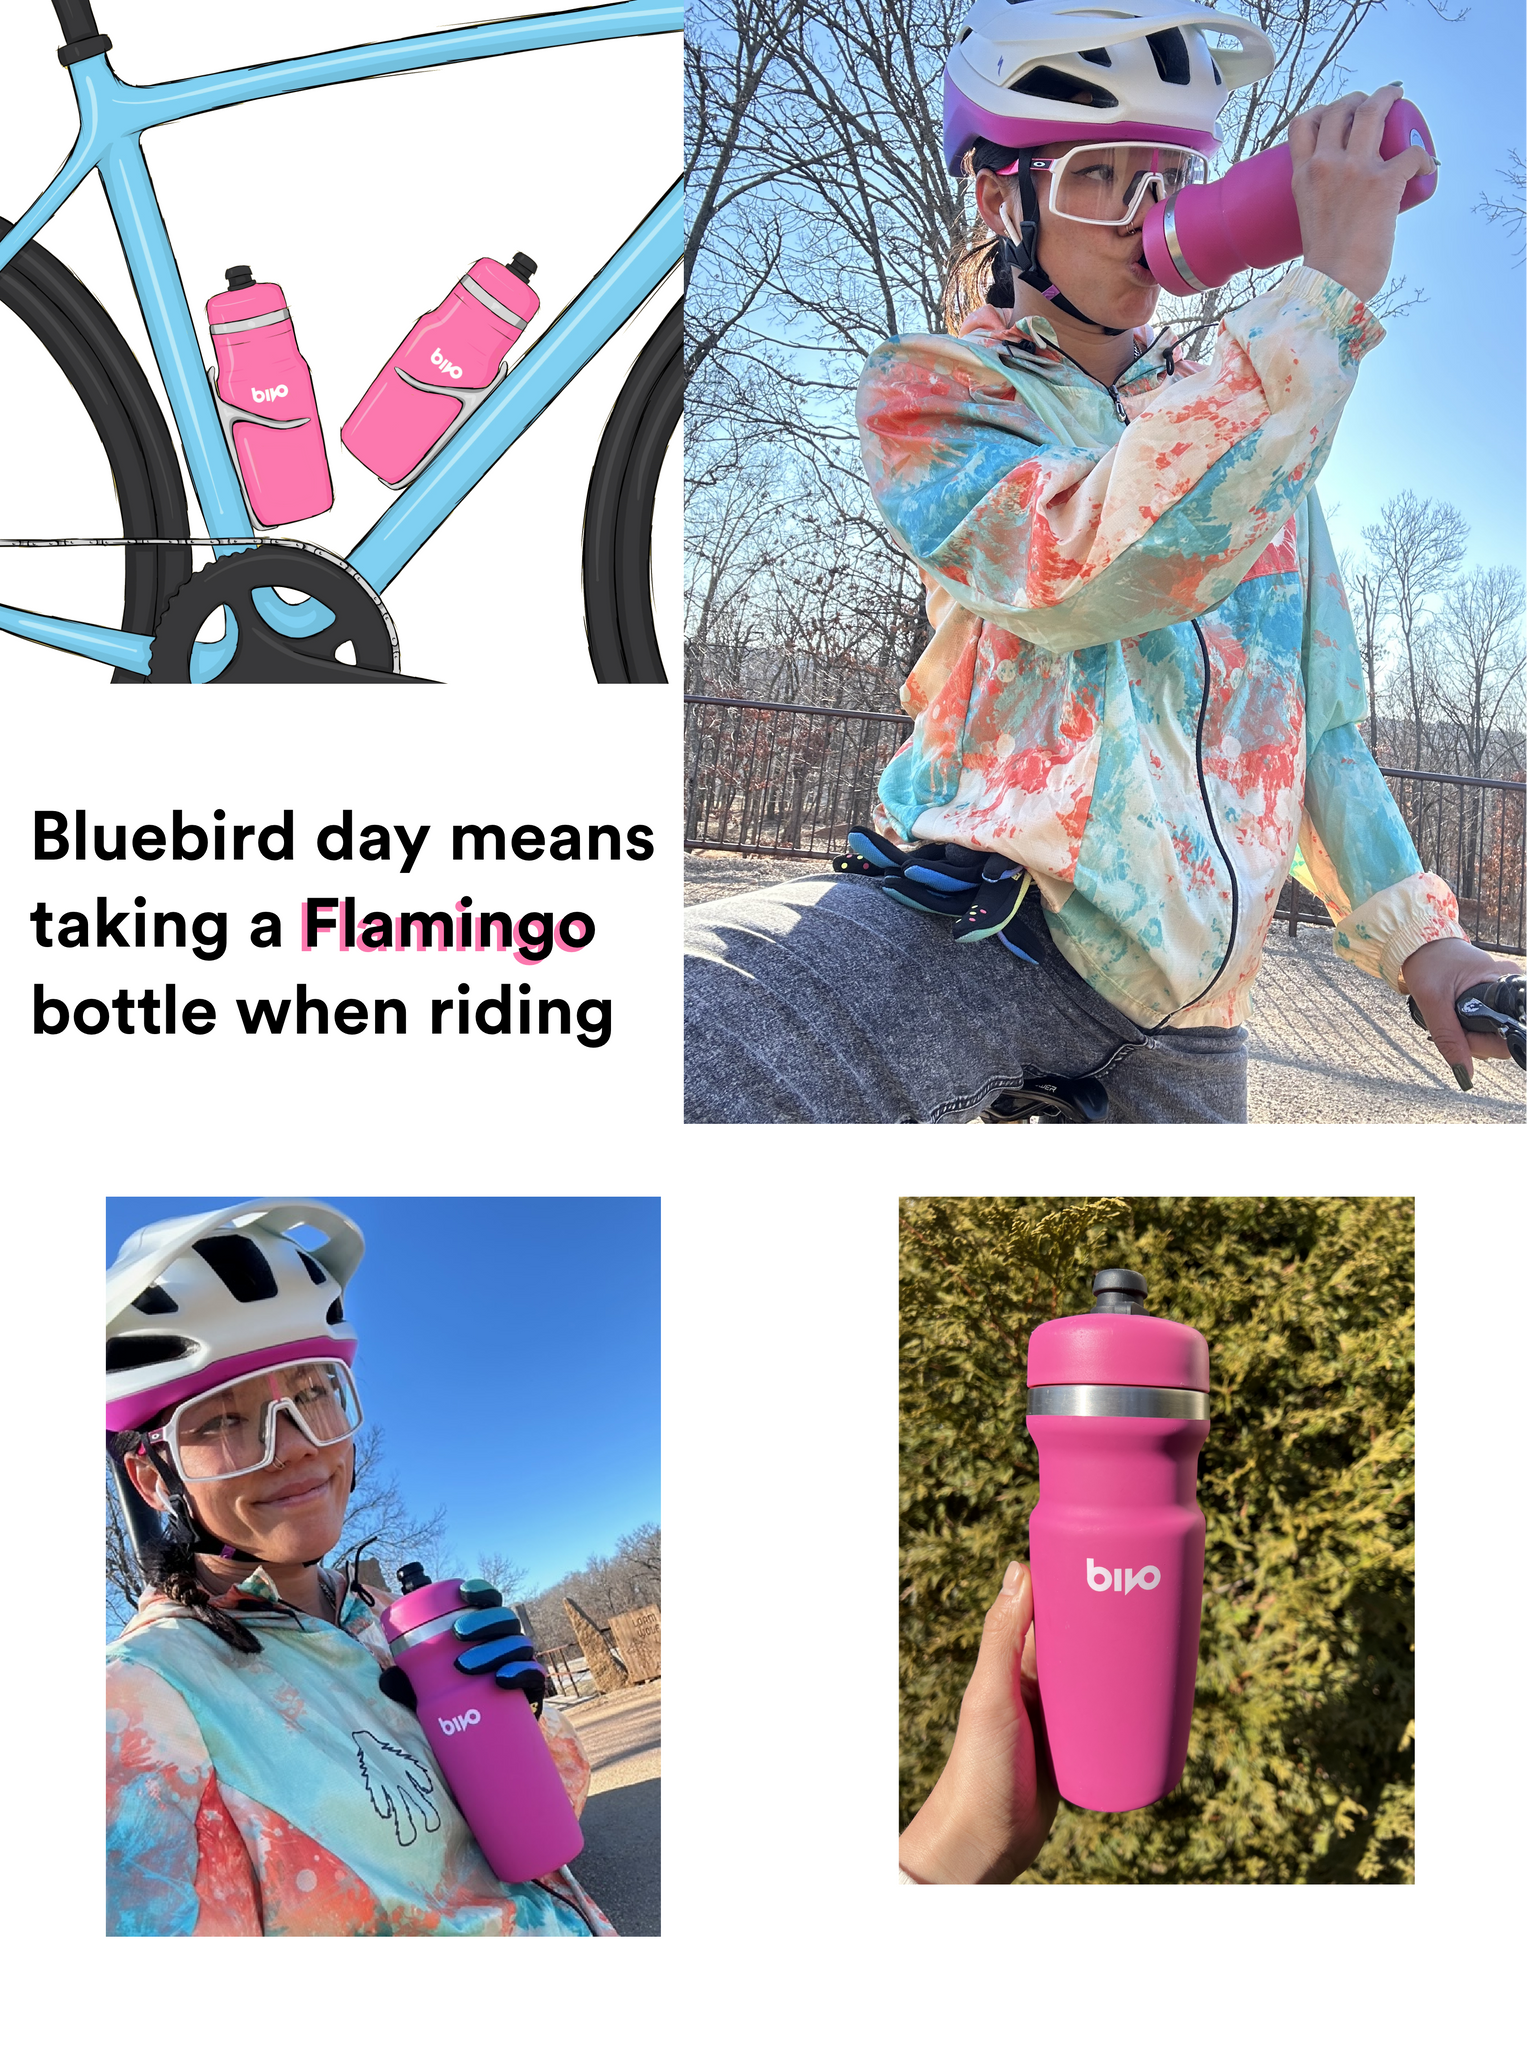 Bluebird day means taking a Flamingo bottle when riding